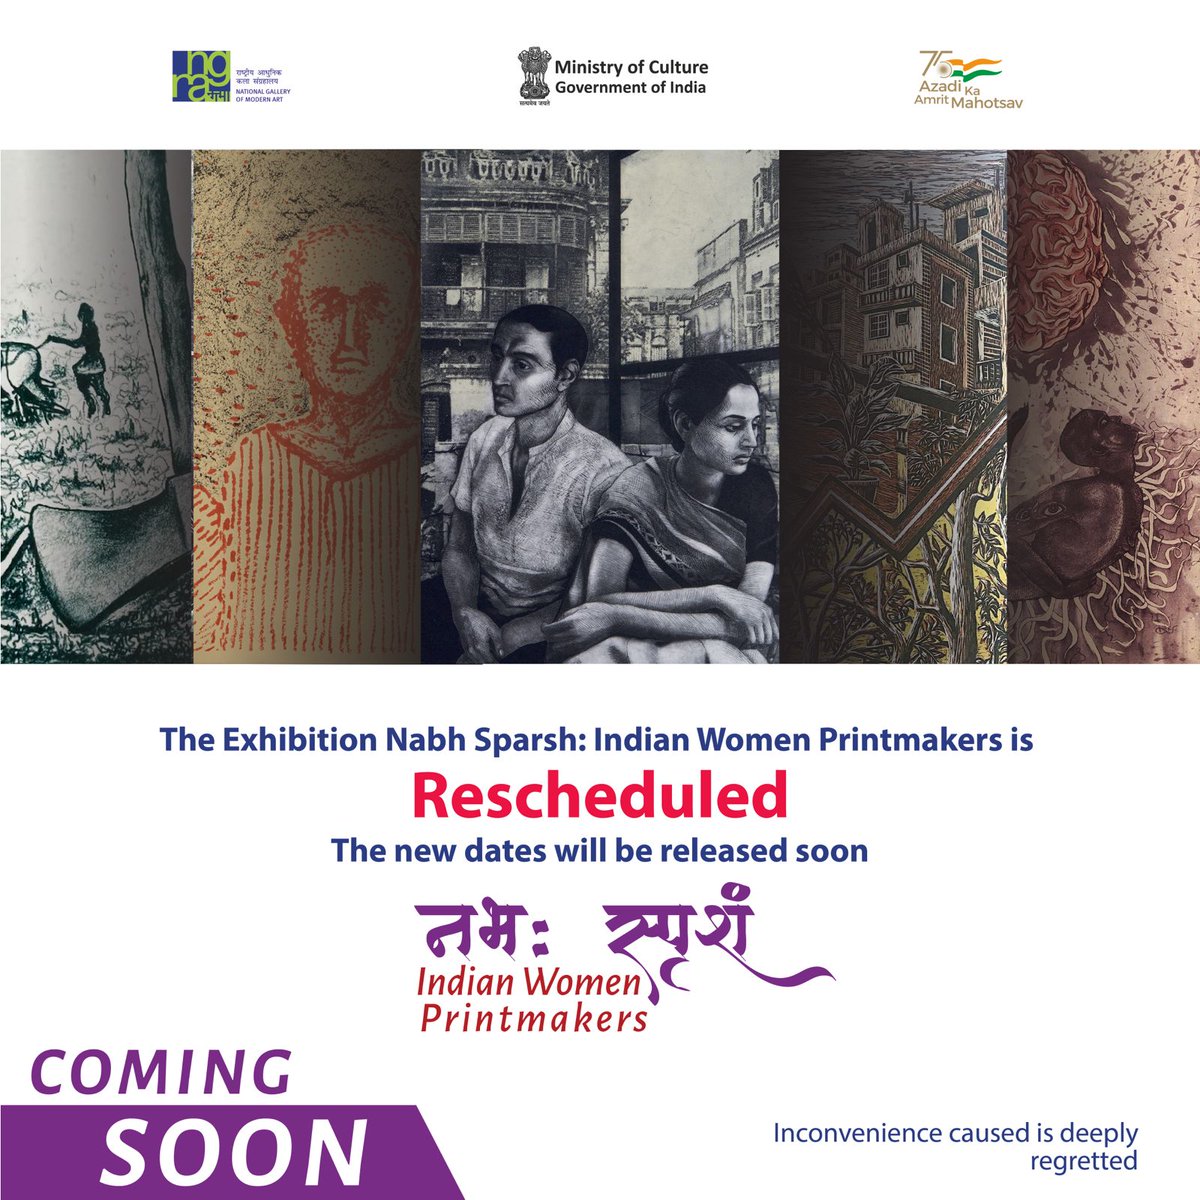 Coming Soon.....
The exhibition titled 'NABH SPARSH : Indian Women Printmakers' is rescheduled. Checkout this space for the new dates.

#NGMA #IndianWomenPrinmakers
@ministryofculturegoi @sanjeevgoutamrajput